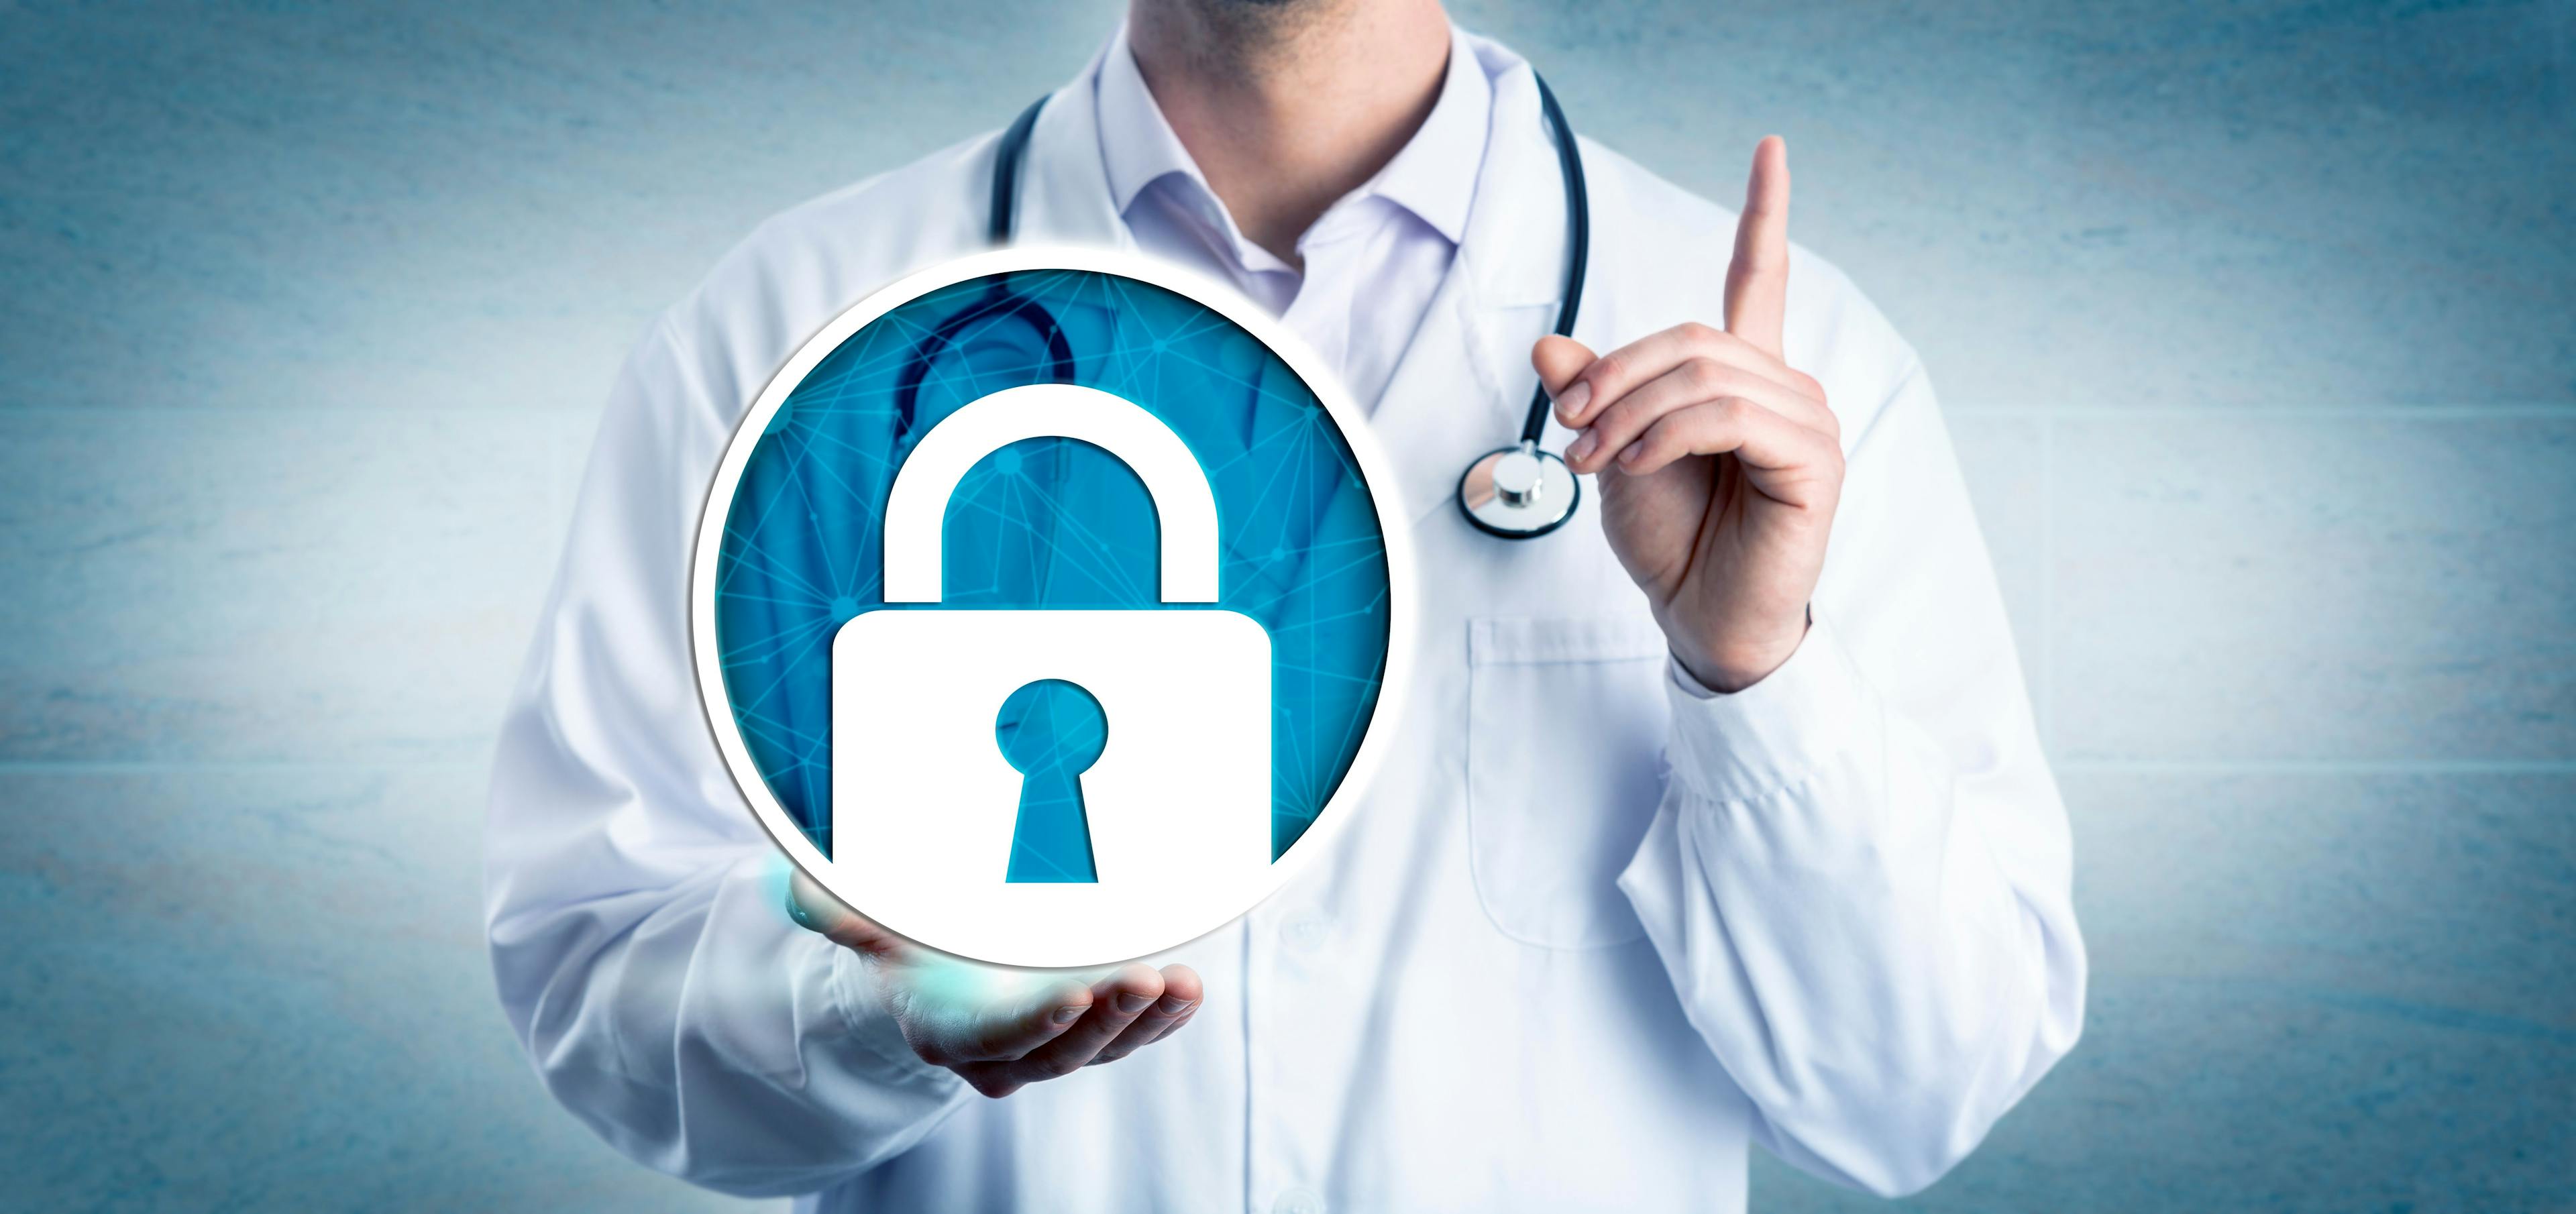 Independent Pharmacies Must Prioritize Cybersecurity